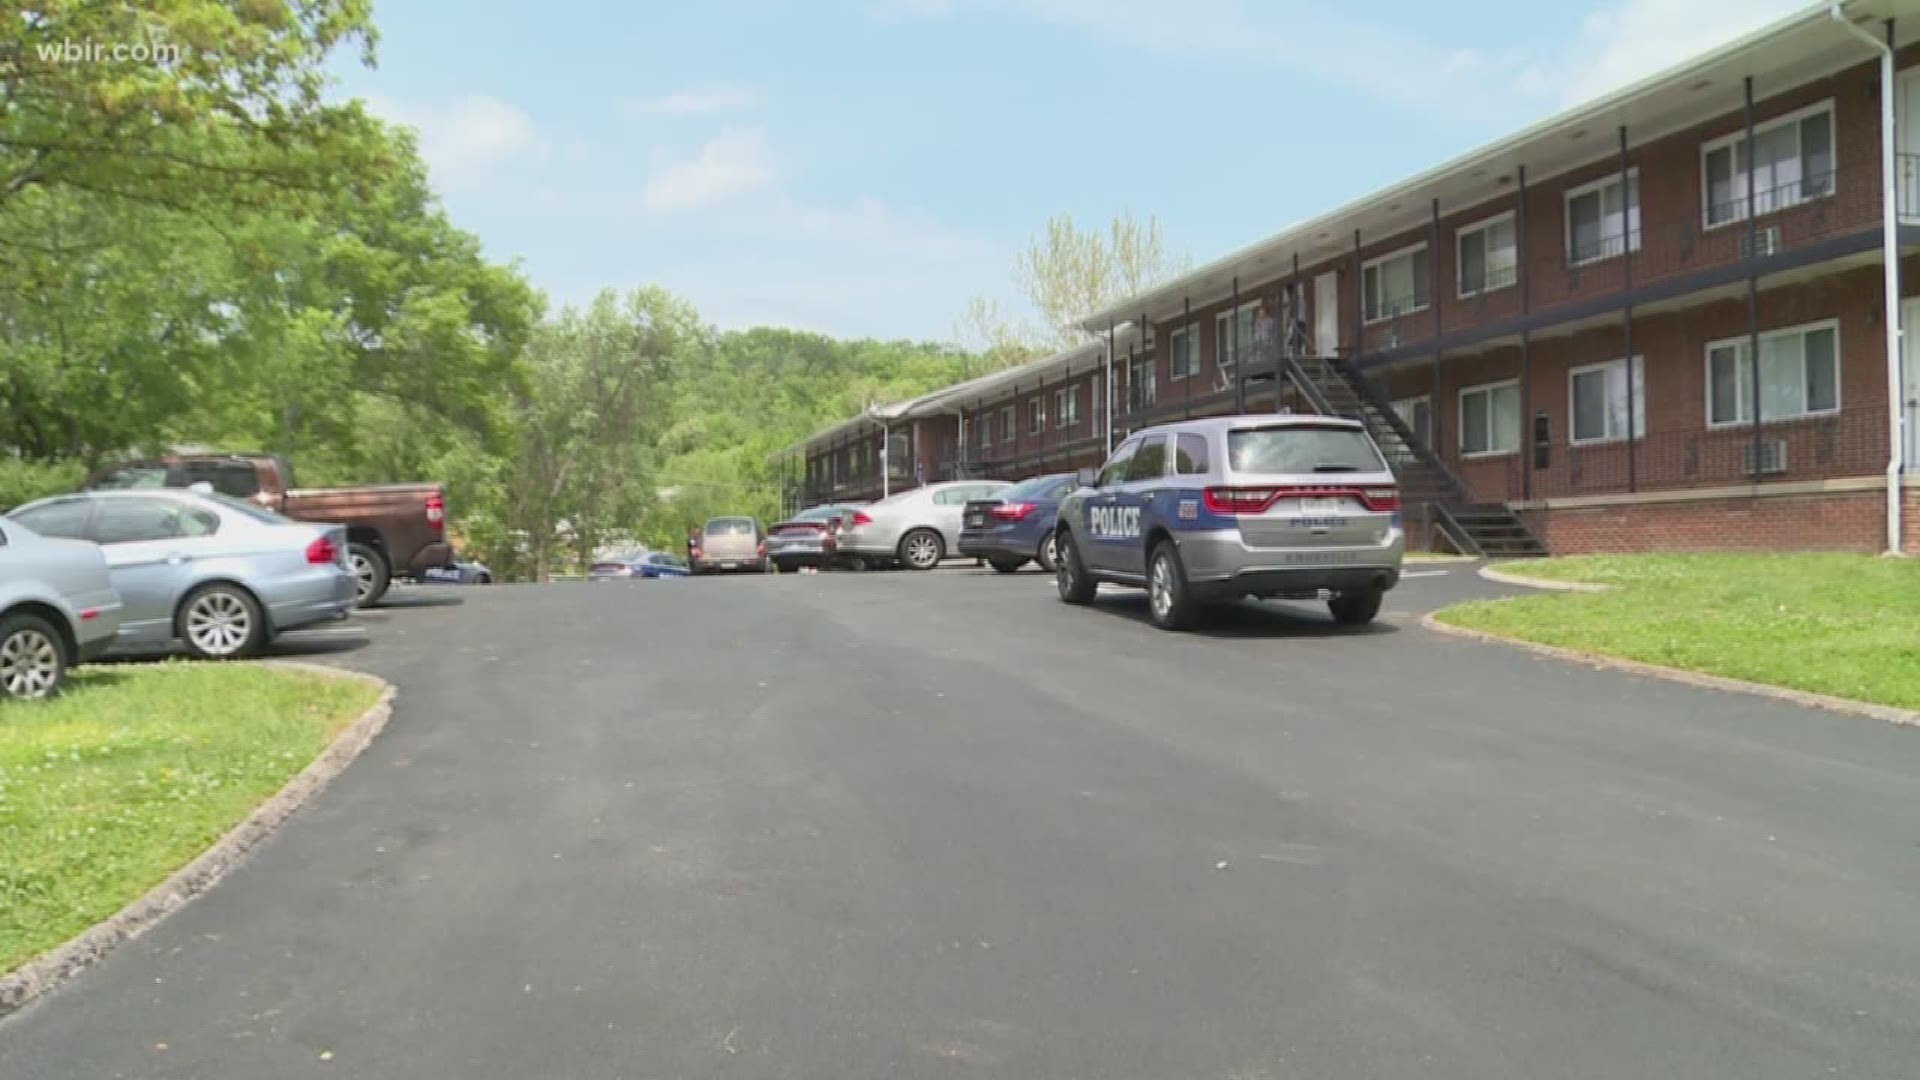 A young man was rushed to the hospital with potentially life threatening injuries after he was shot at his north Knoxville apartment on Friday.